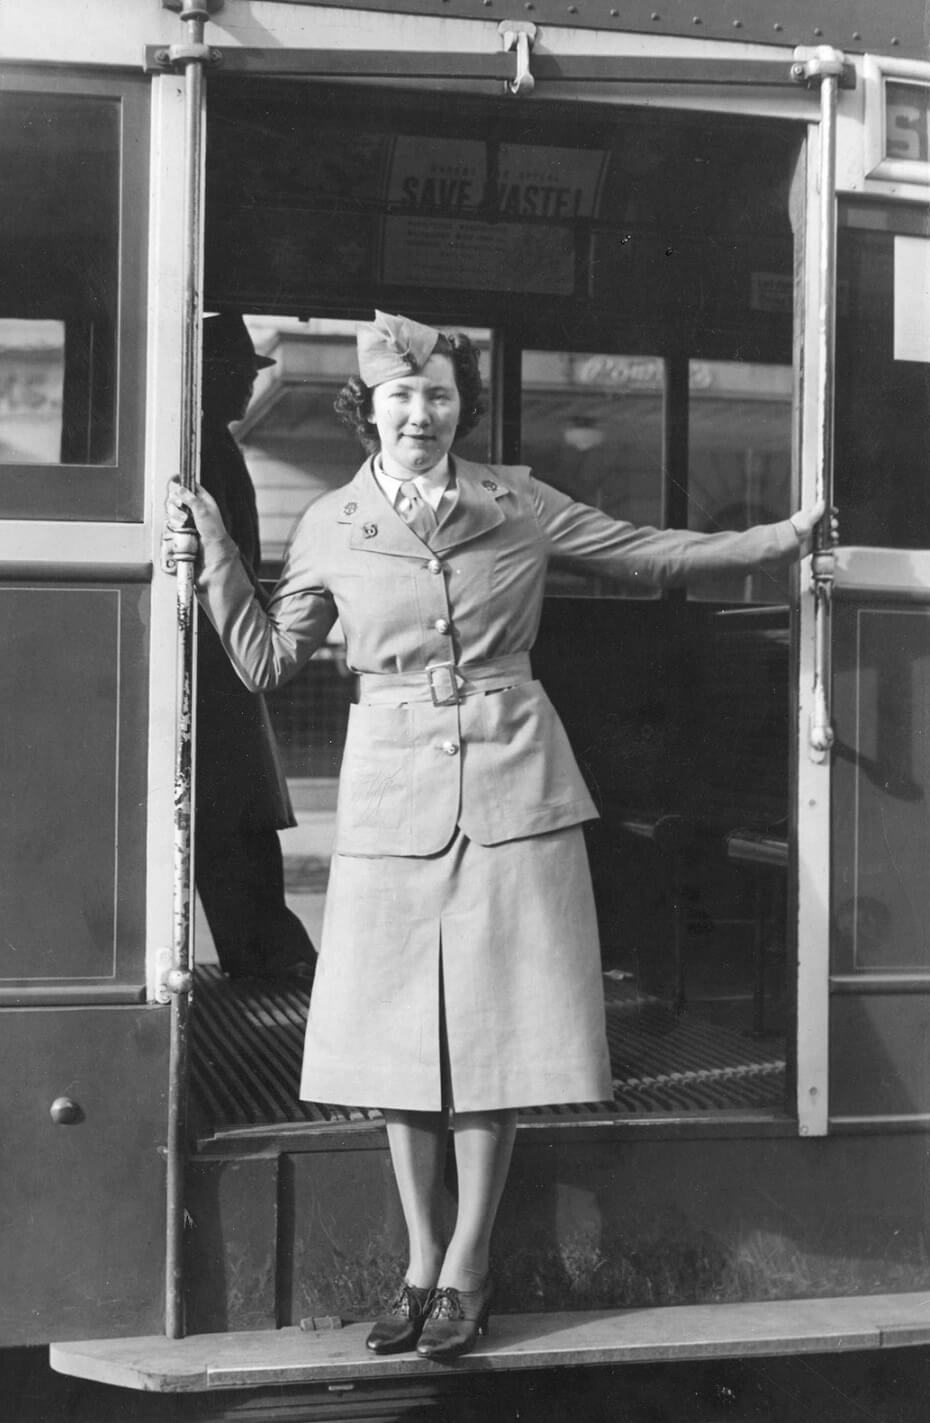 Shows tram conductress for the M.& M.T.B., Victoria modelling the uniform to be worn by women employees.